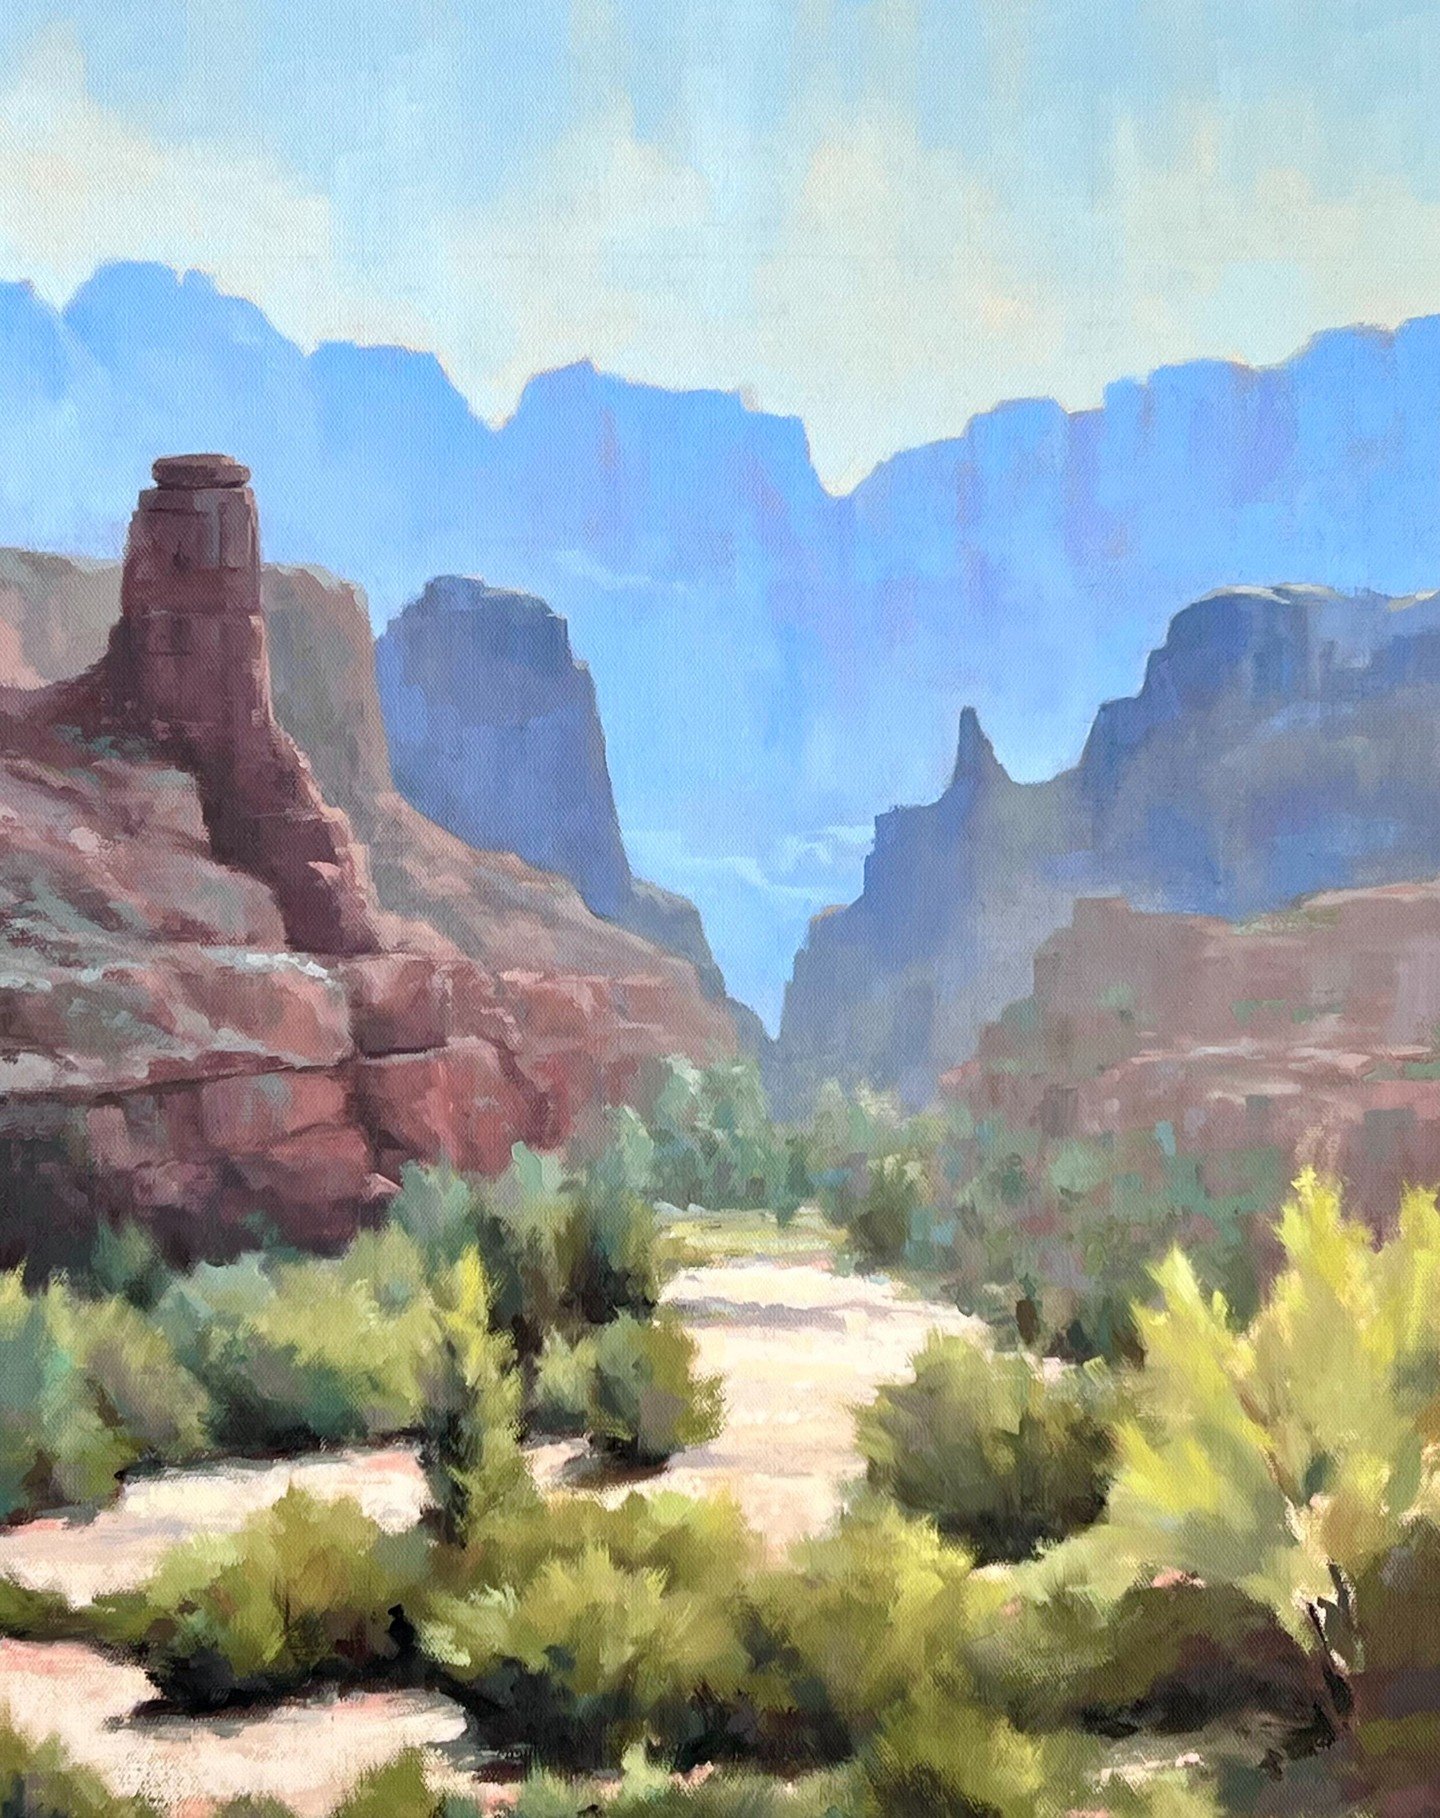 Sorry, repost because the previous photo was bad. Big Spring Canyon, Utah. 18x24 oil. 

#landscapepainting #oilpainting #westernart #southwestart #utah #canyons #canyonlands #boulderartist #coloradoartist #pleinair #landscapeart